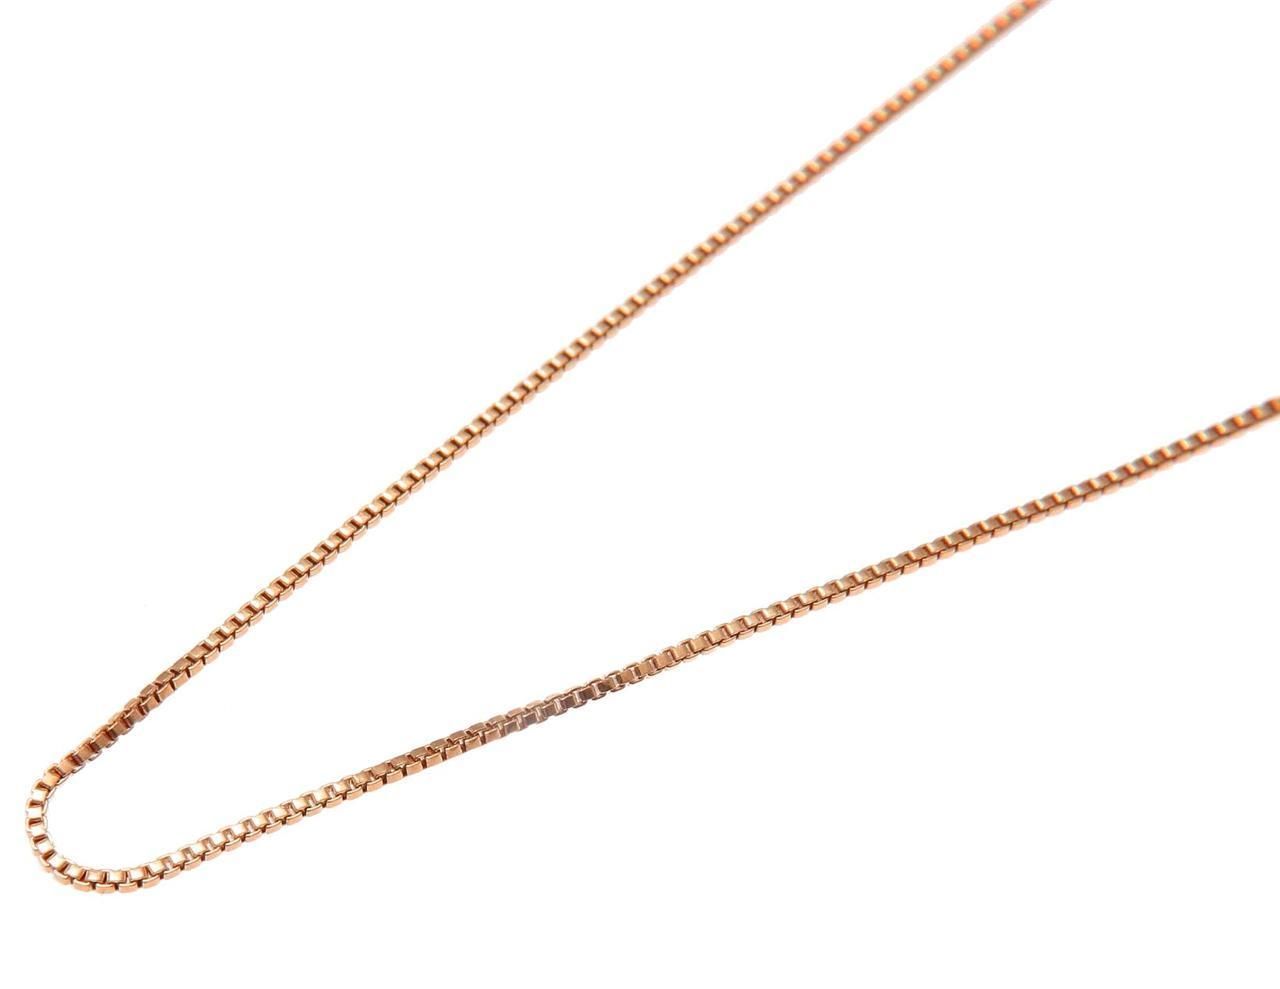 Pink Rose Gold on 925 Sterling Silver Italian 1mm Box Chain Necklace 16" 18" 20"